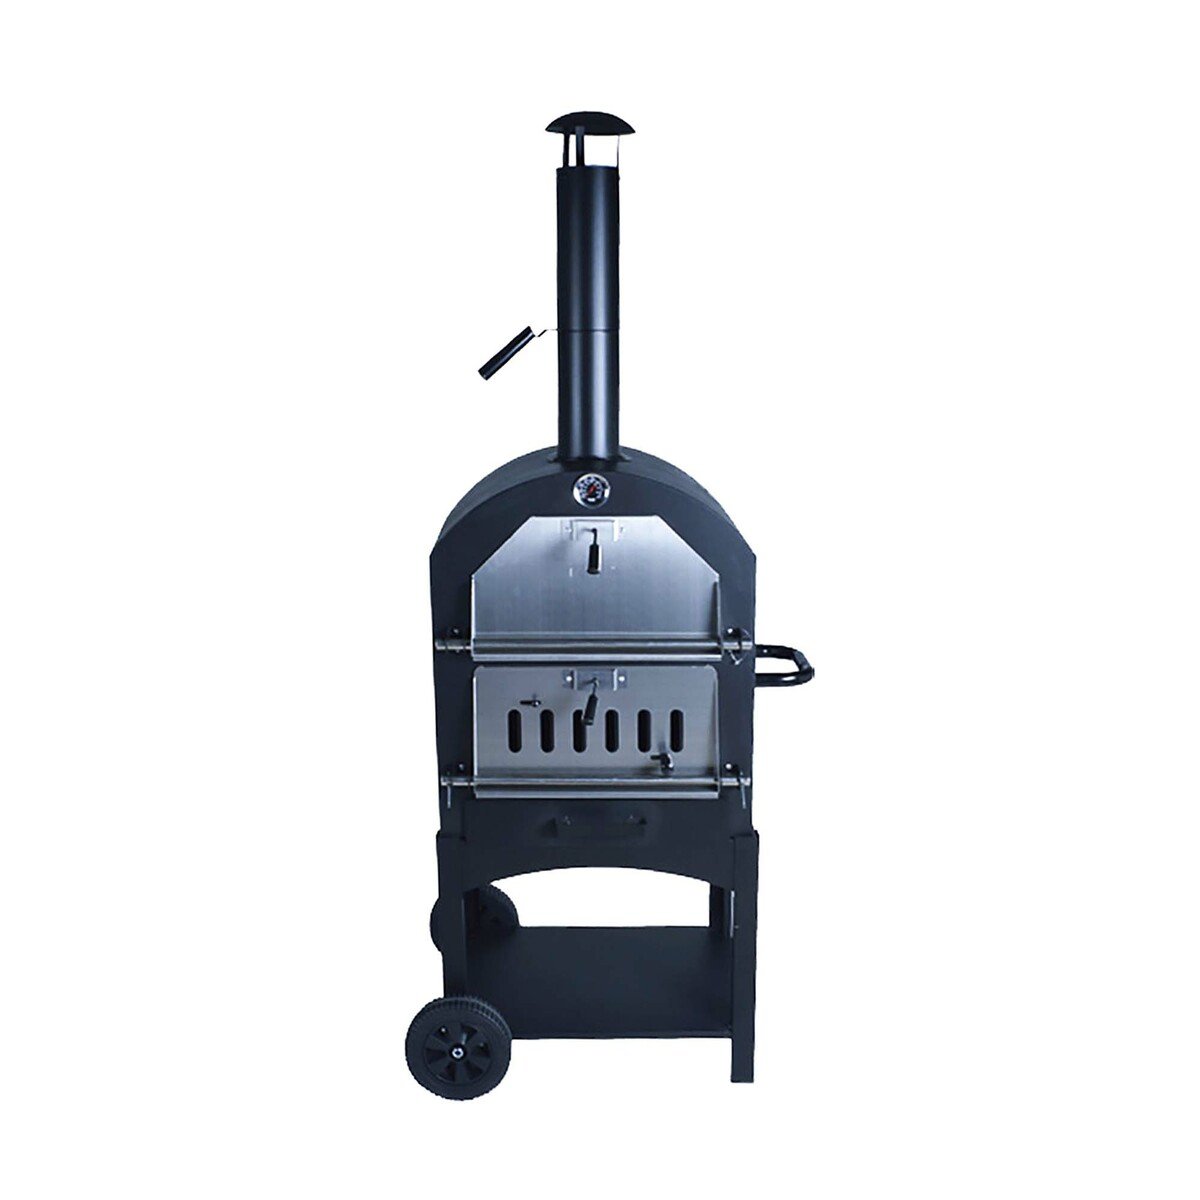 Relax BBQ Charcoal/ Pizza Grill KY-2526 104cm Online at Best Price, Deals  on Outdoor Products, Lulu Kuwait price in UAE, LuLu UAE